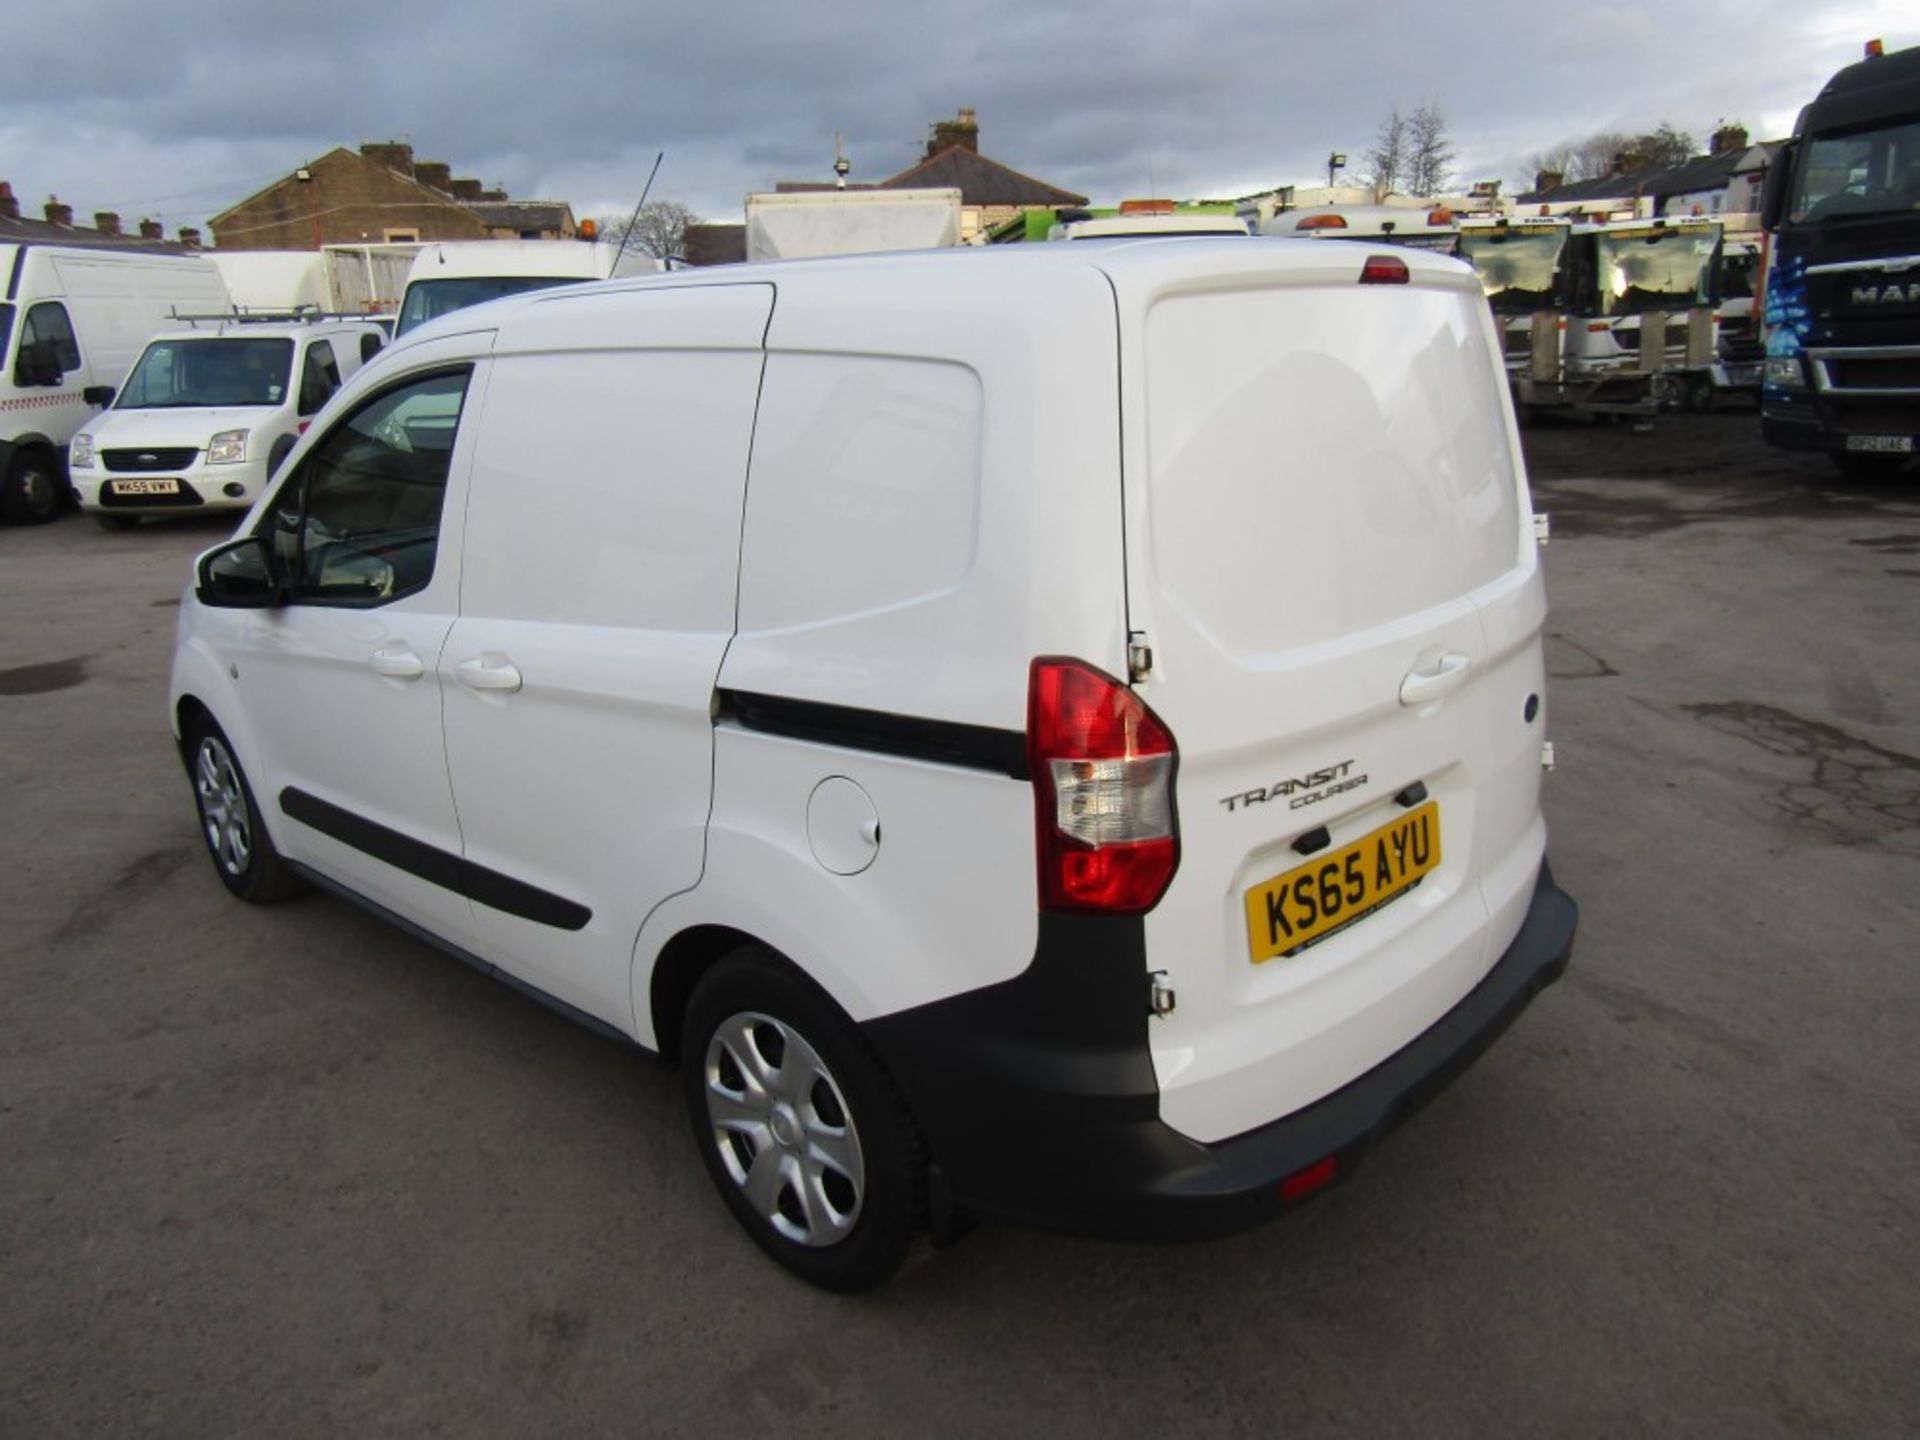 65 reg FORD TRANSIT COURIER TREND TDCI, PLY LINING, BLUETOOTH, 4 SERVICE BOOK STAMPS, 1ST REG - Image 3 of 7